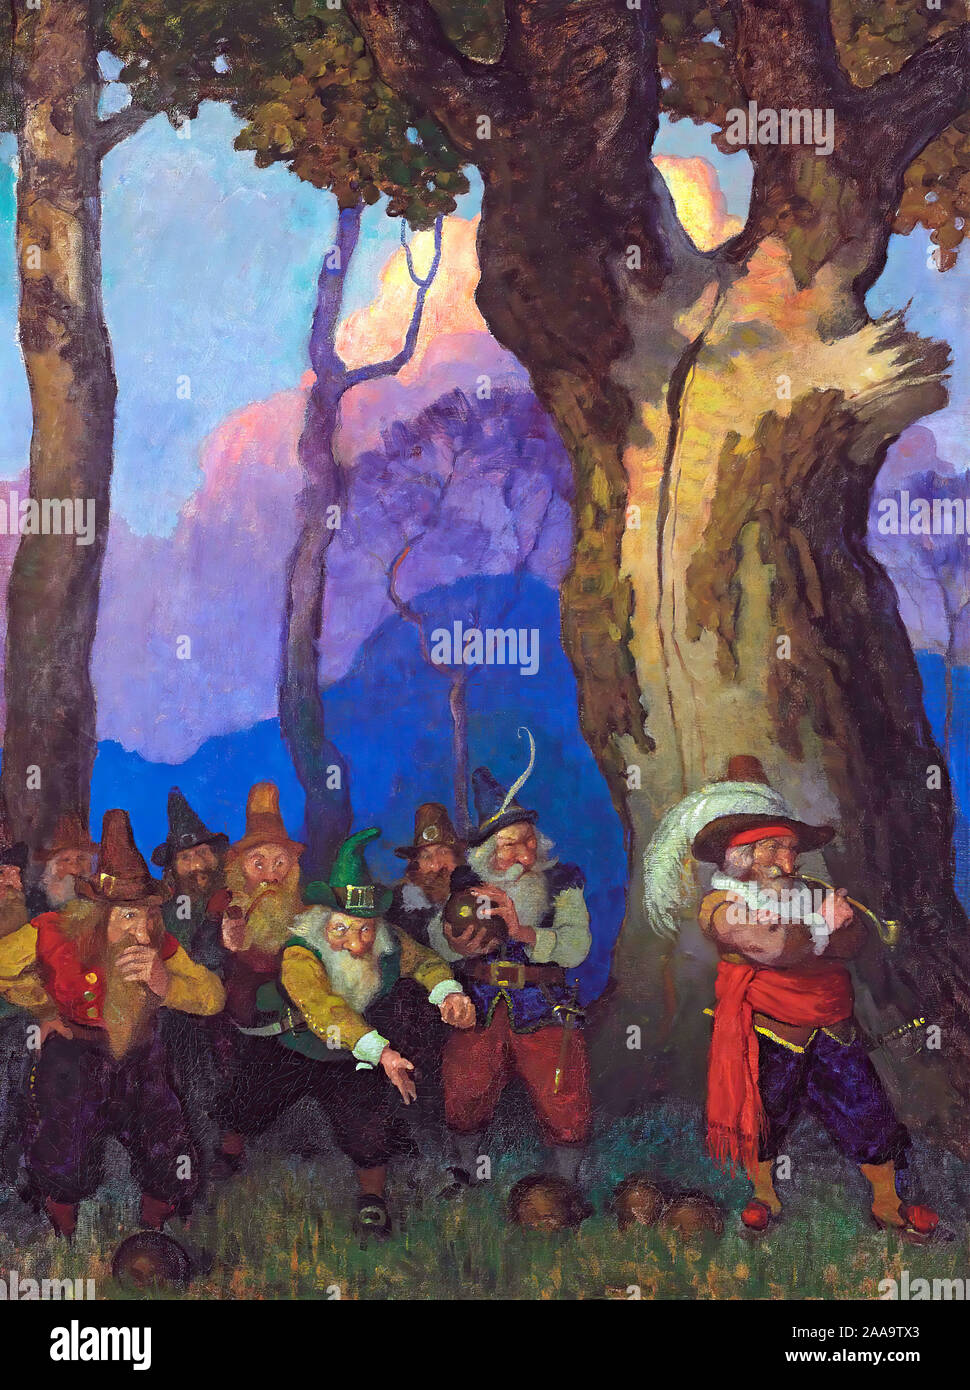 NC Wyeth Though These Folks Were Evidently Amusing Themselves Yet They maintained the Gravest Faces The Most Mysterious Silence by NC Wyeth Stock Photo